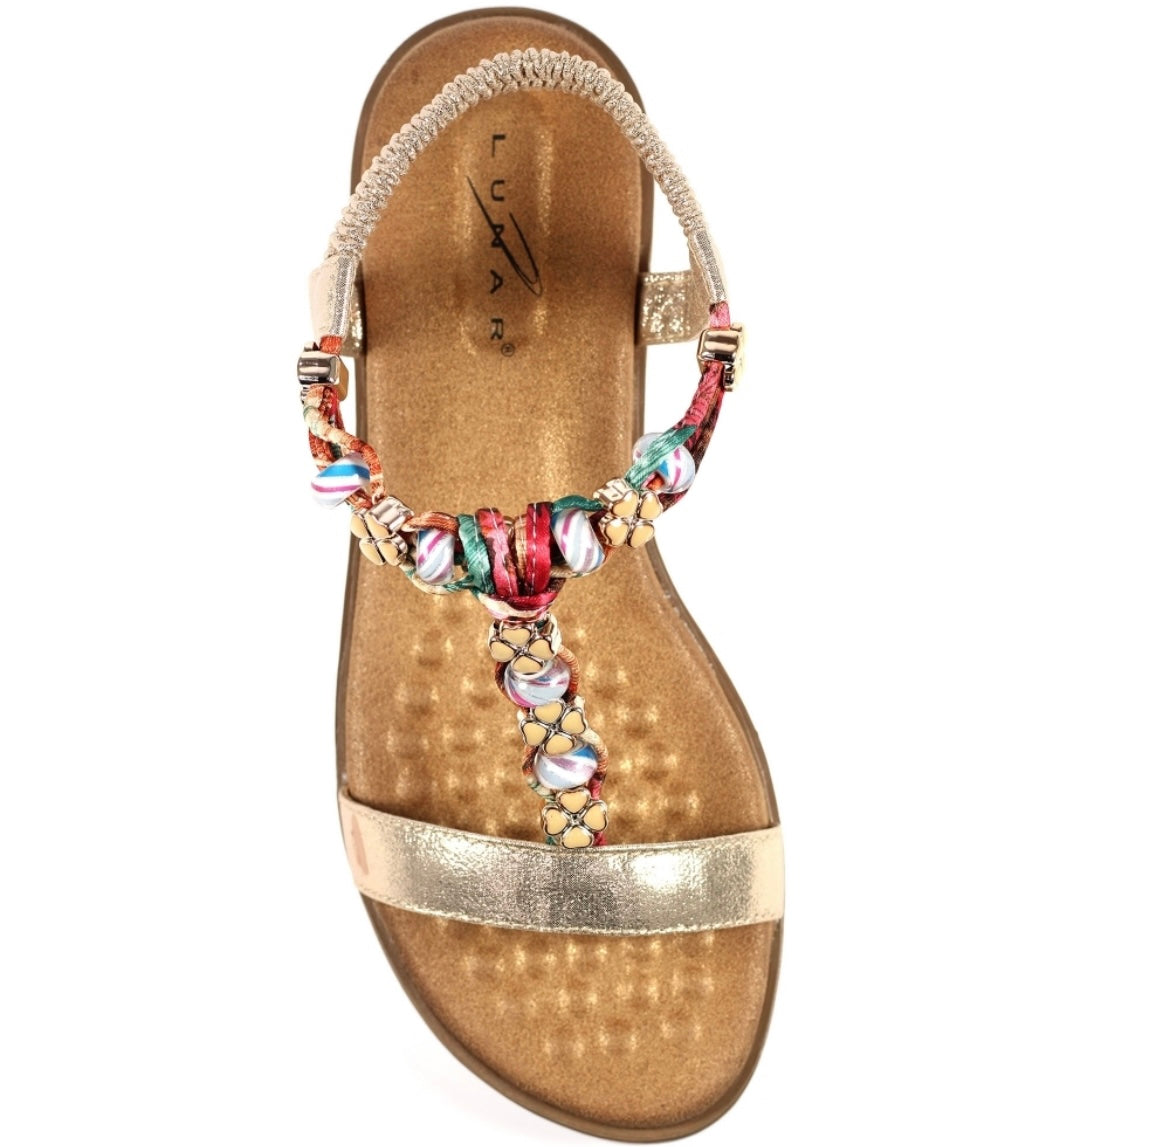 Buy Lunars Womens Sandals (8400M) (numeric_7) at Amazon.in